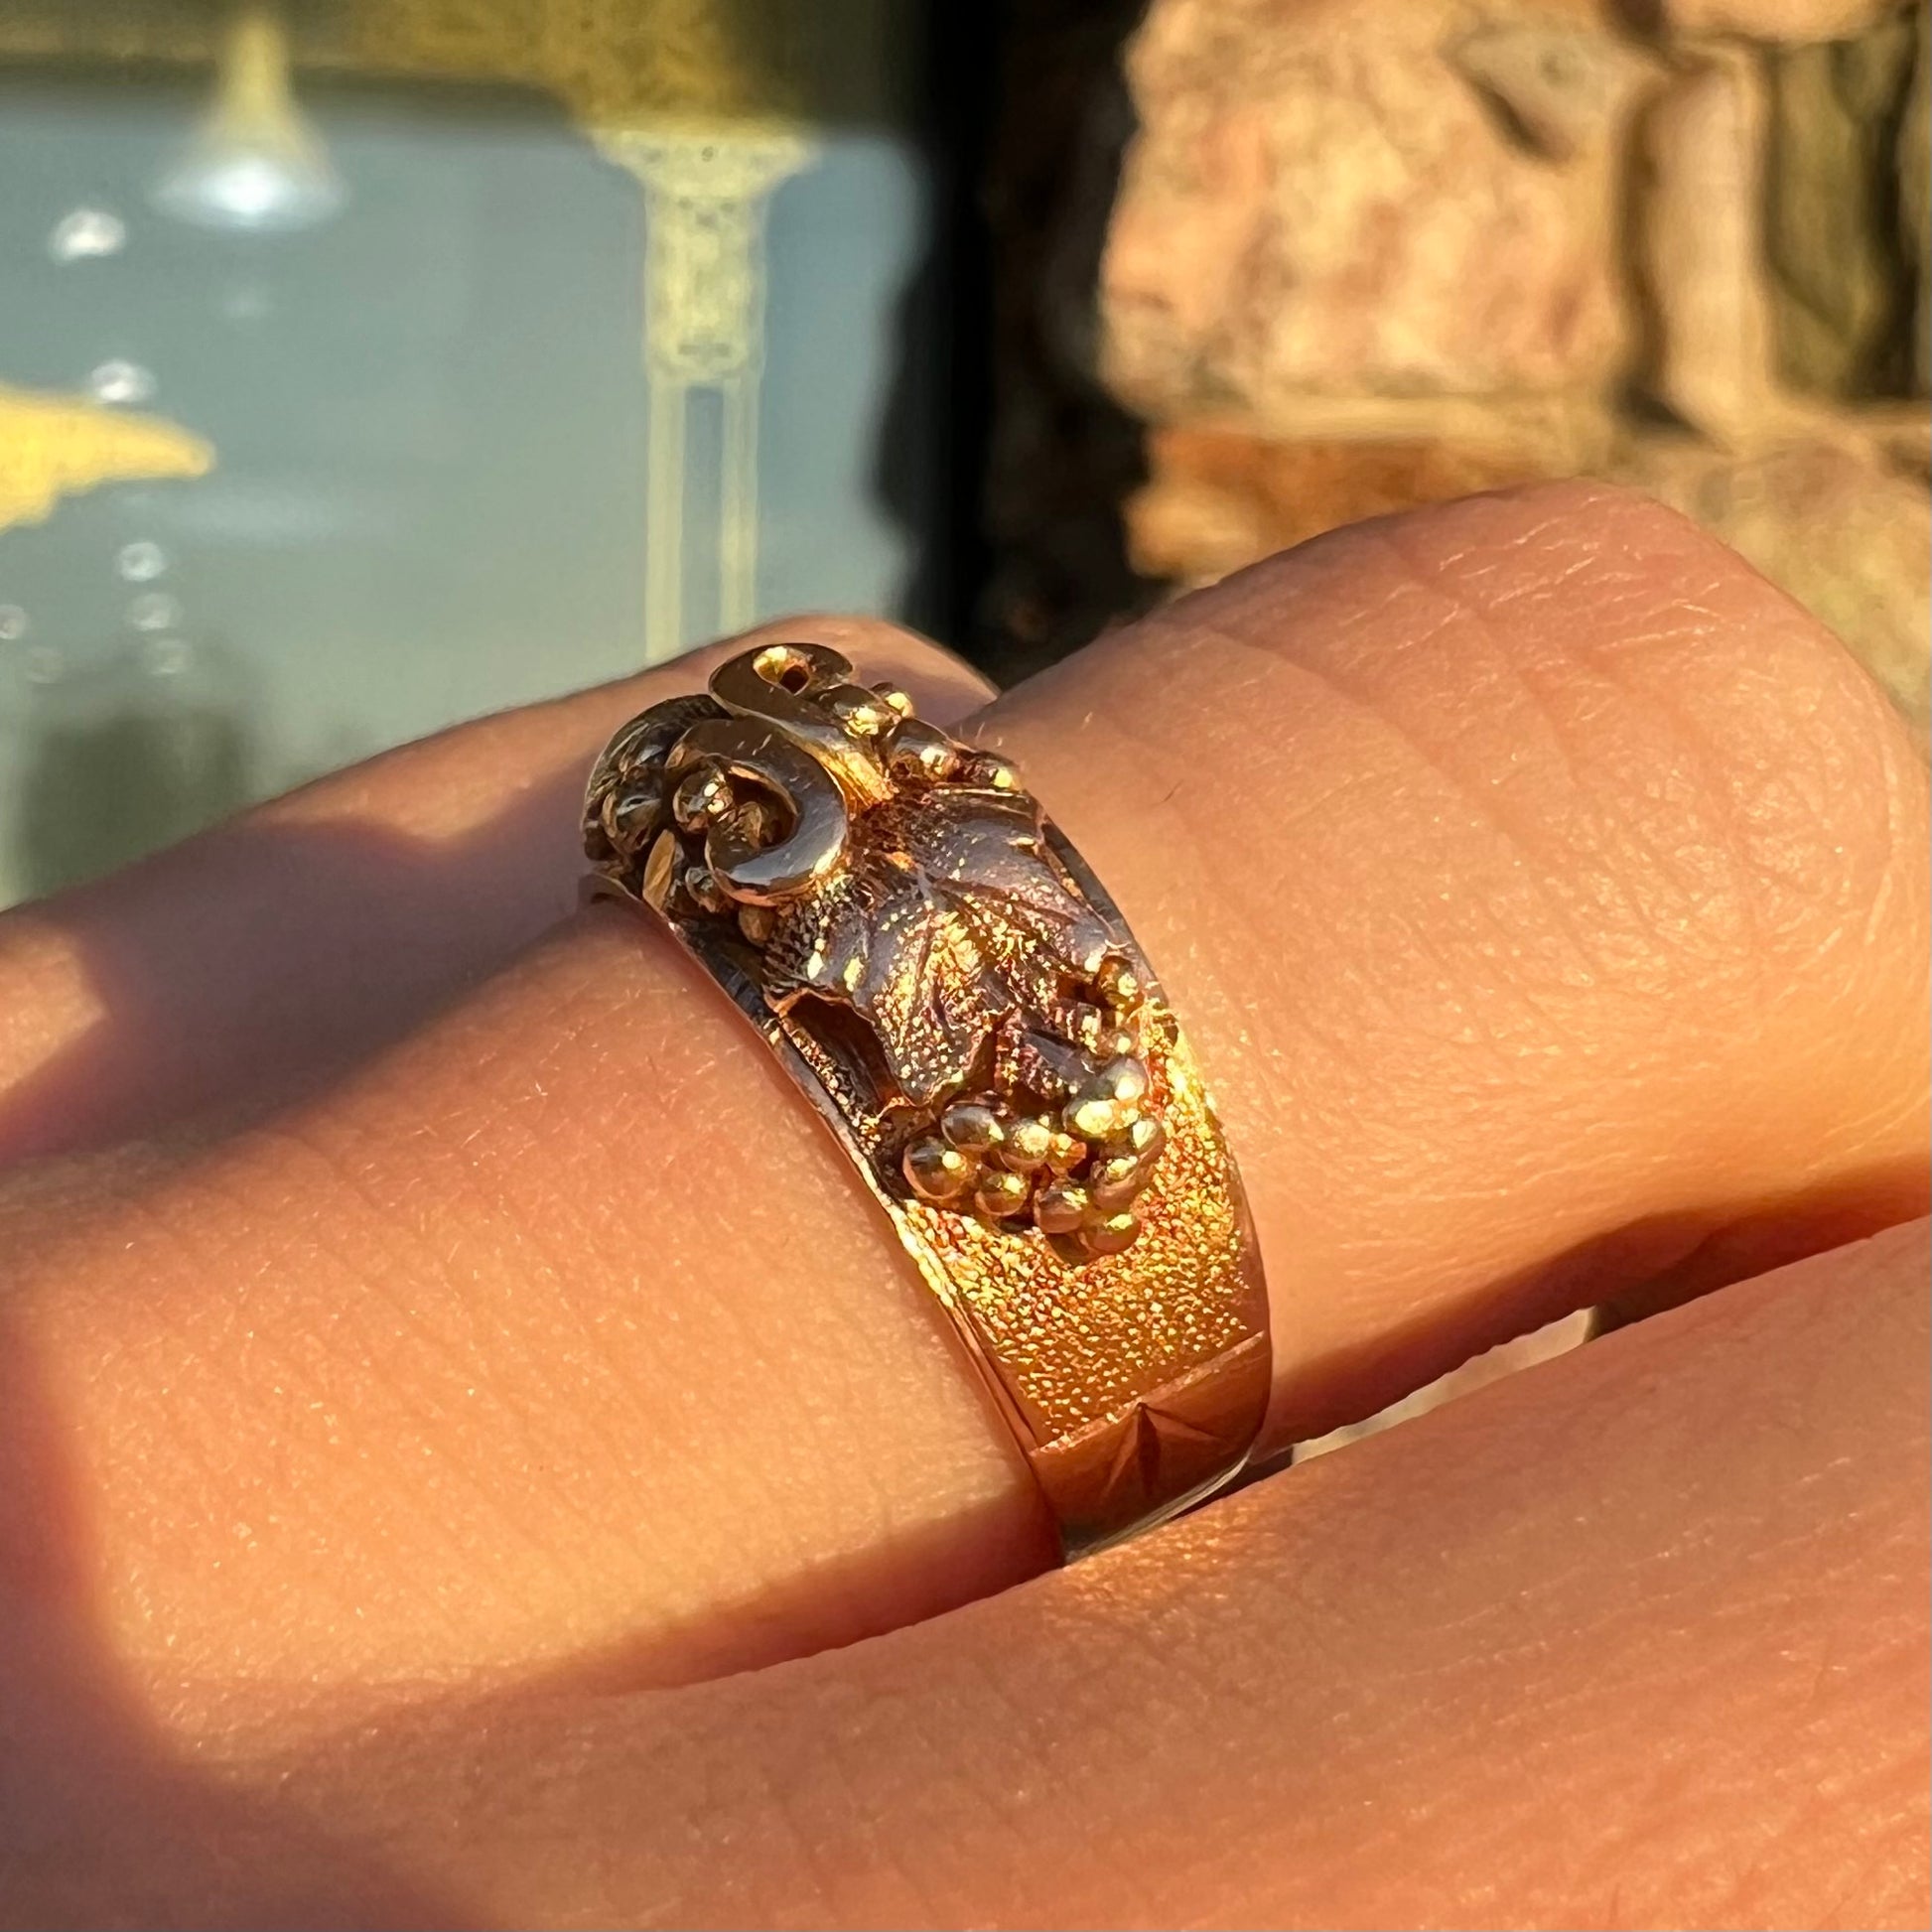 A ladies' two-tone Black Hills gold ring featuring the motif of leaves.  The inside of the ring is stamped "16K" and "BARCLAY".